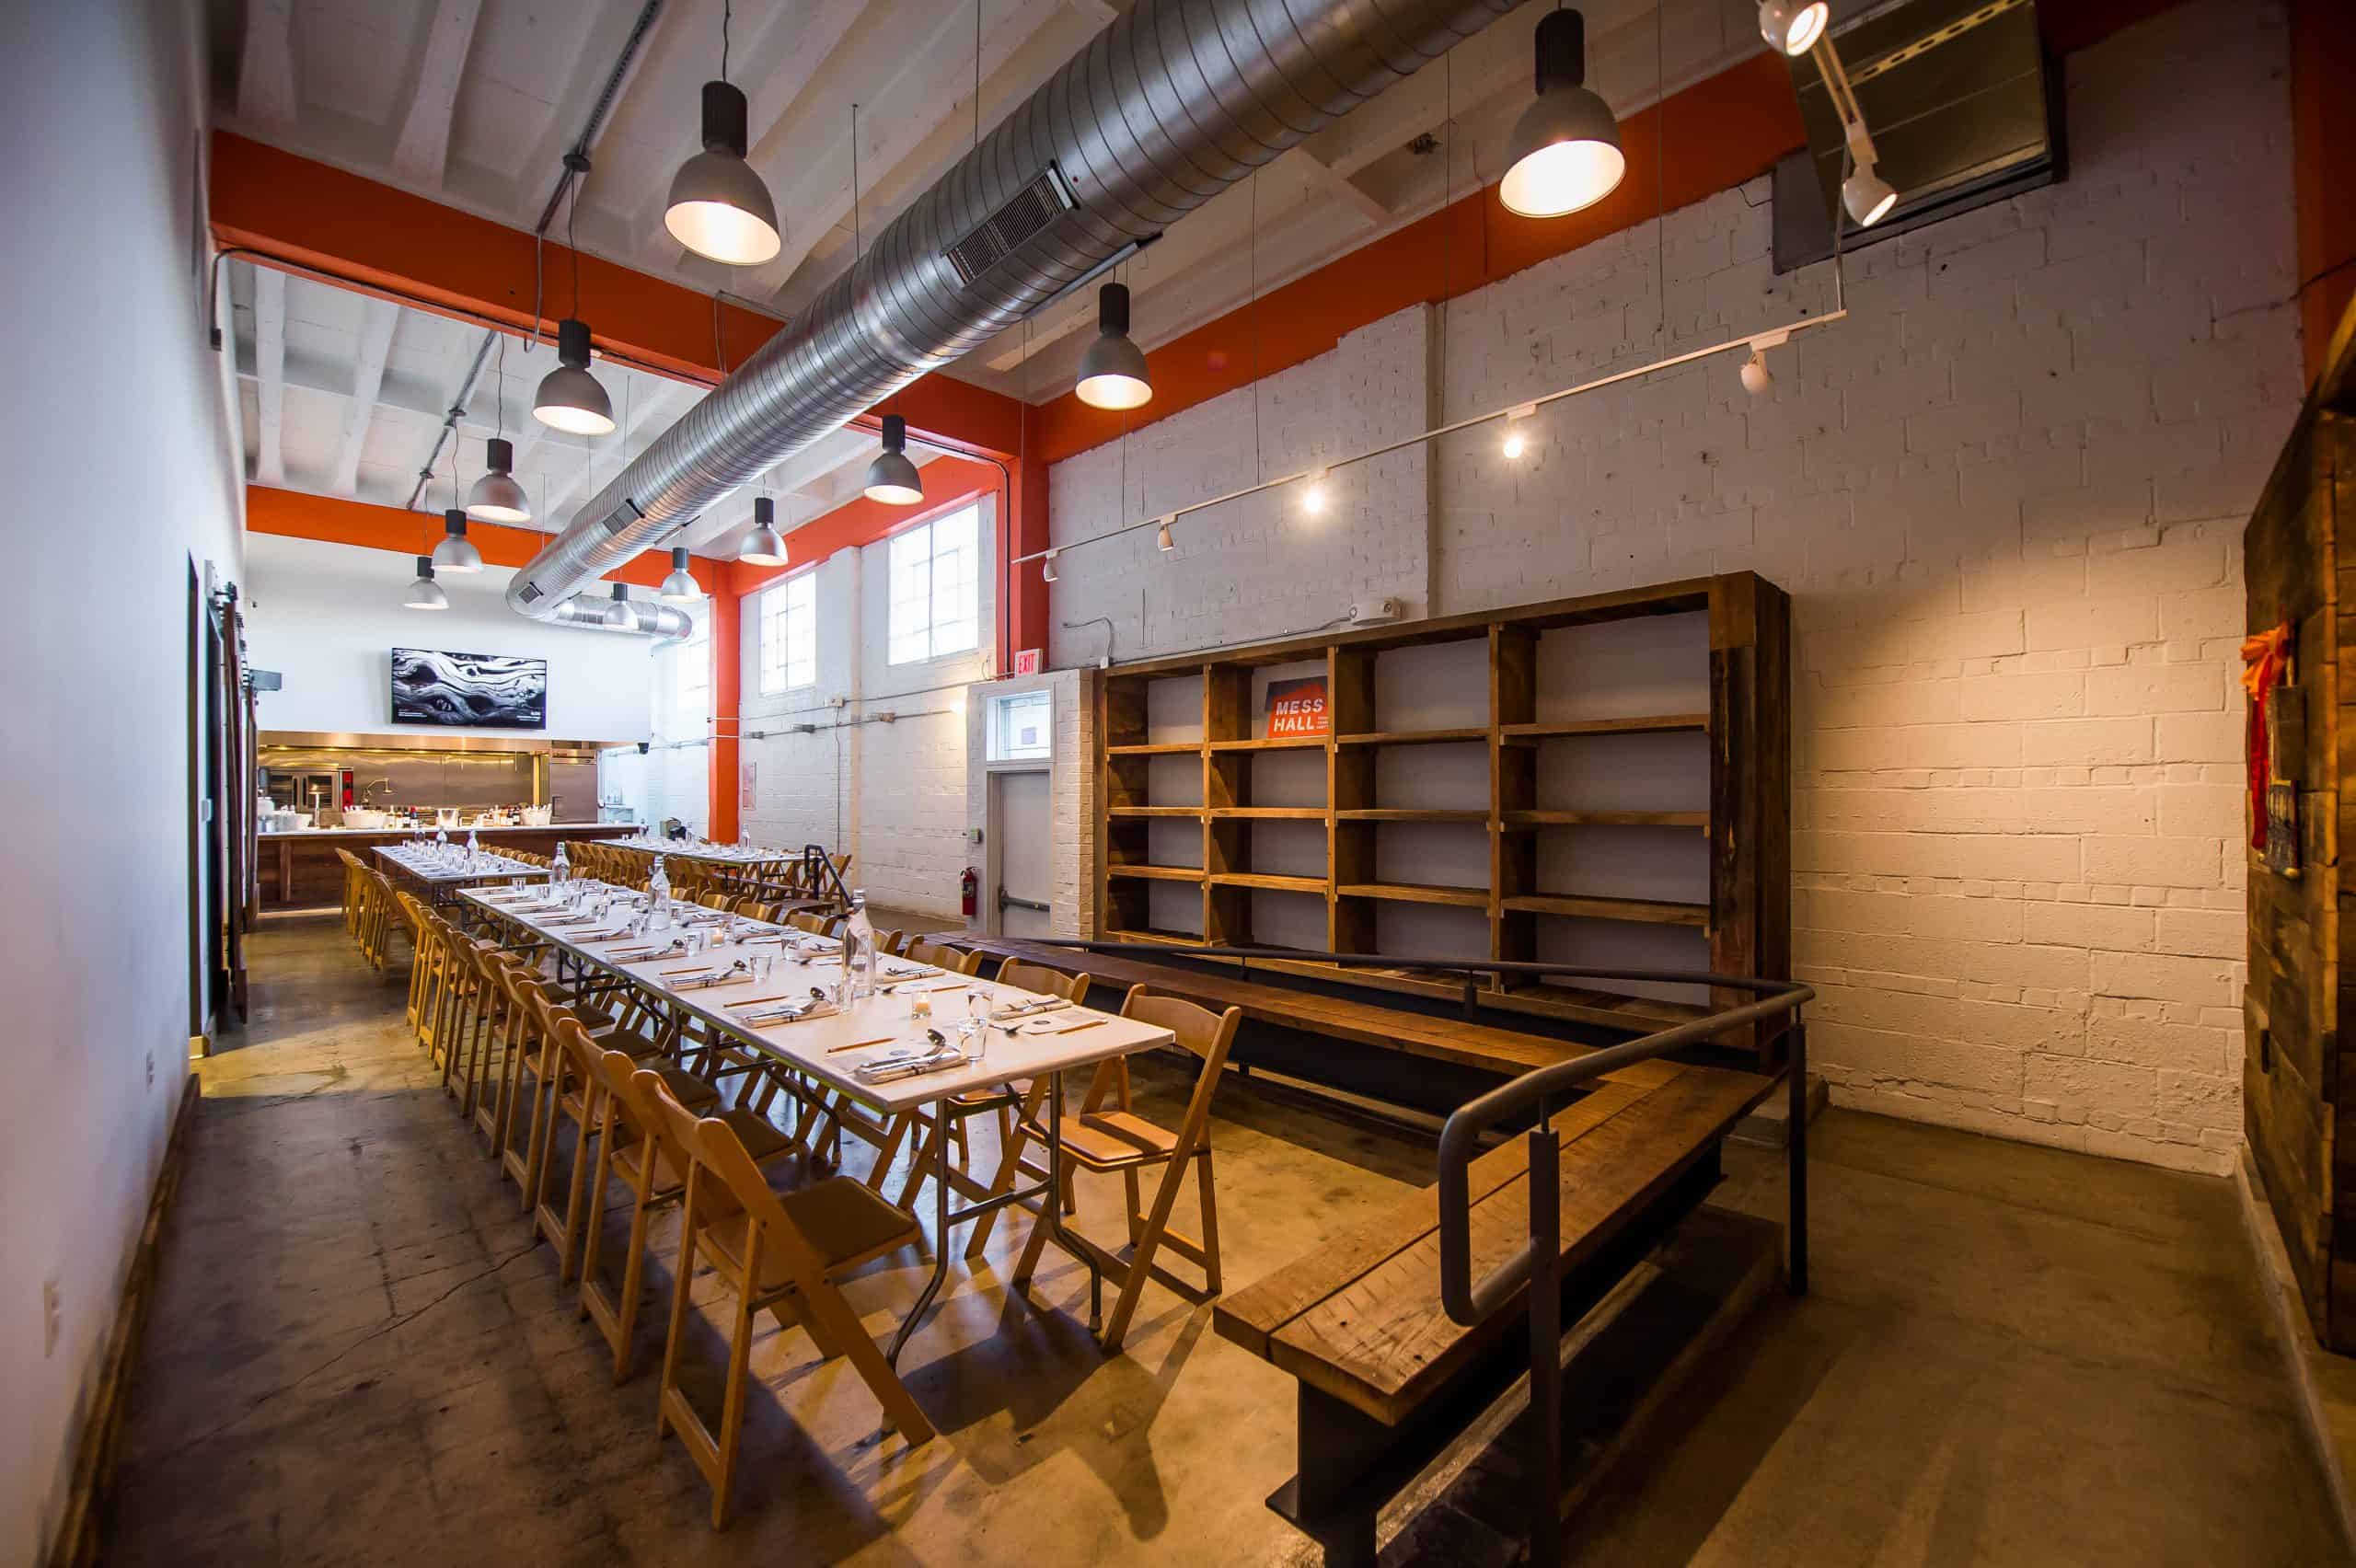 View of the Mess Hall DC event space with tables, built-in shelving and bench